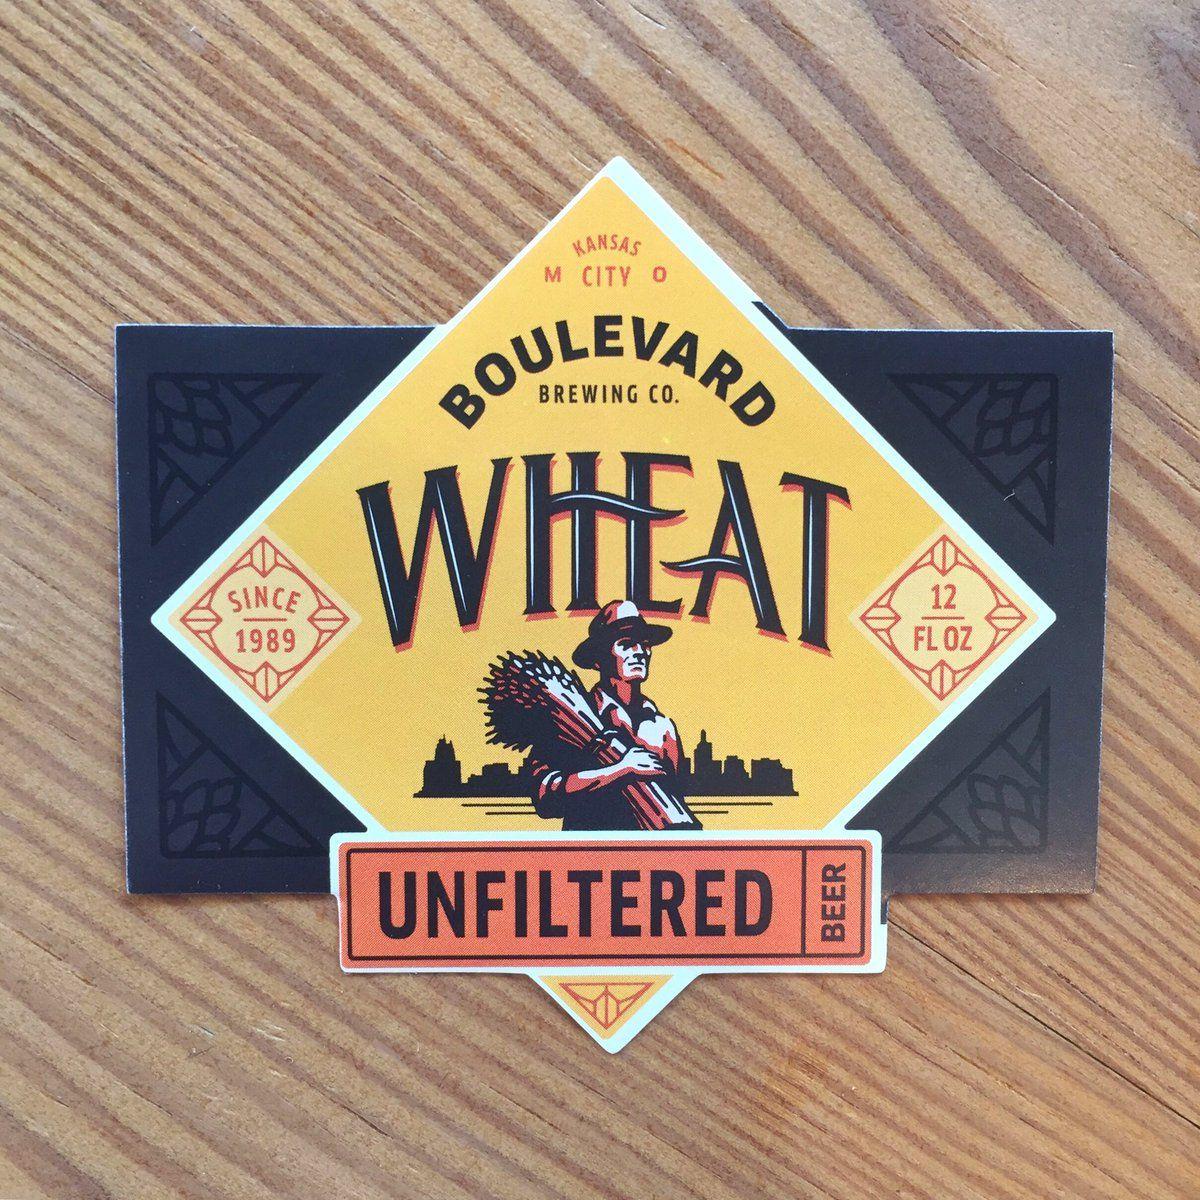 Blvd Beer Logo - Boulevard Brewing Co. new Unfiltered Wheat Beer